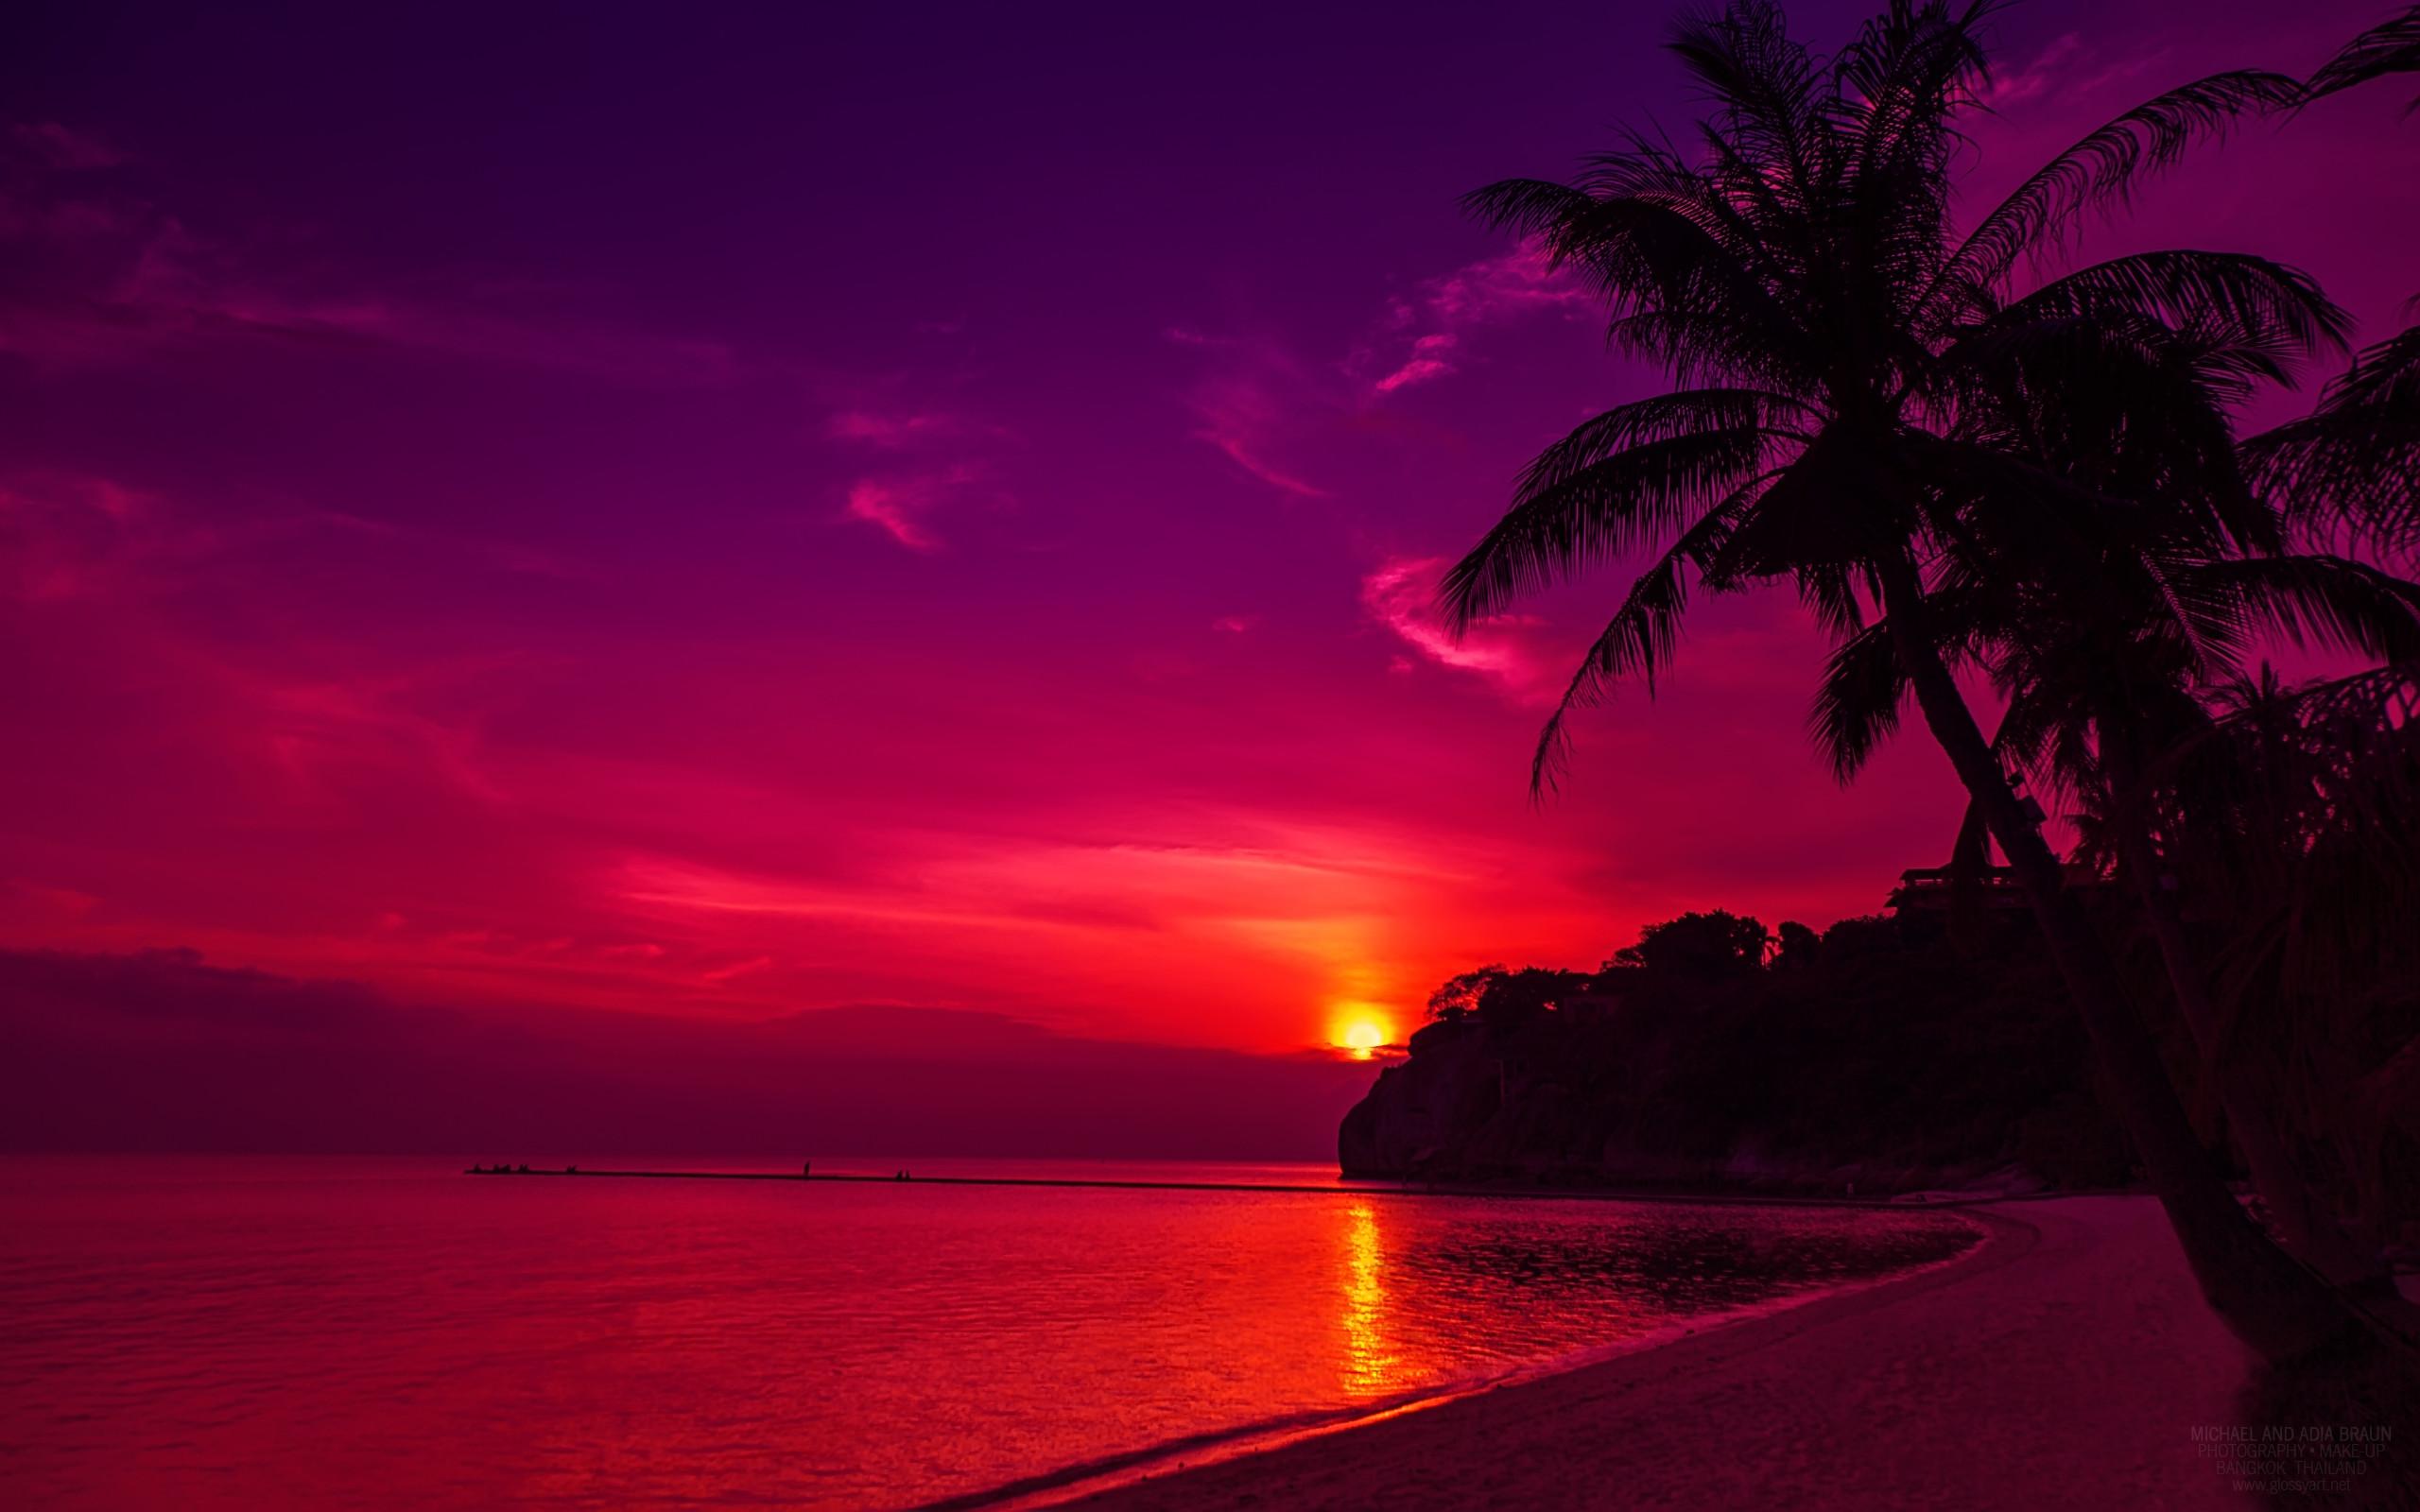 Tropical Island Sunset Wallpapers Top Free Tropical Island Sunset Backgrounds Wallpaperaccess 